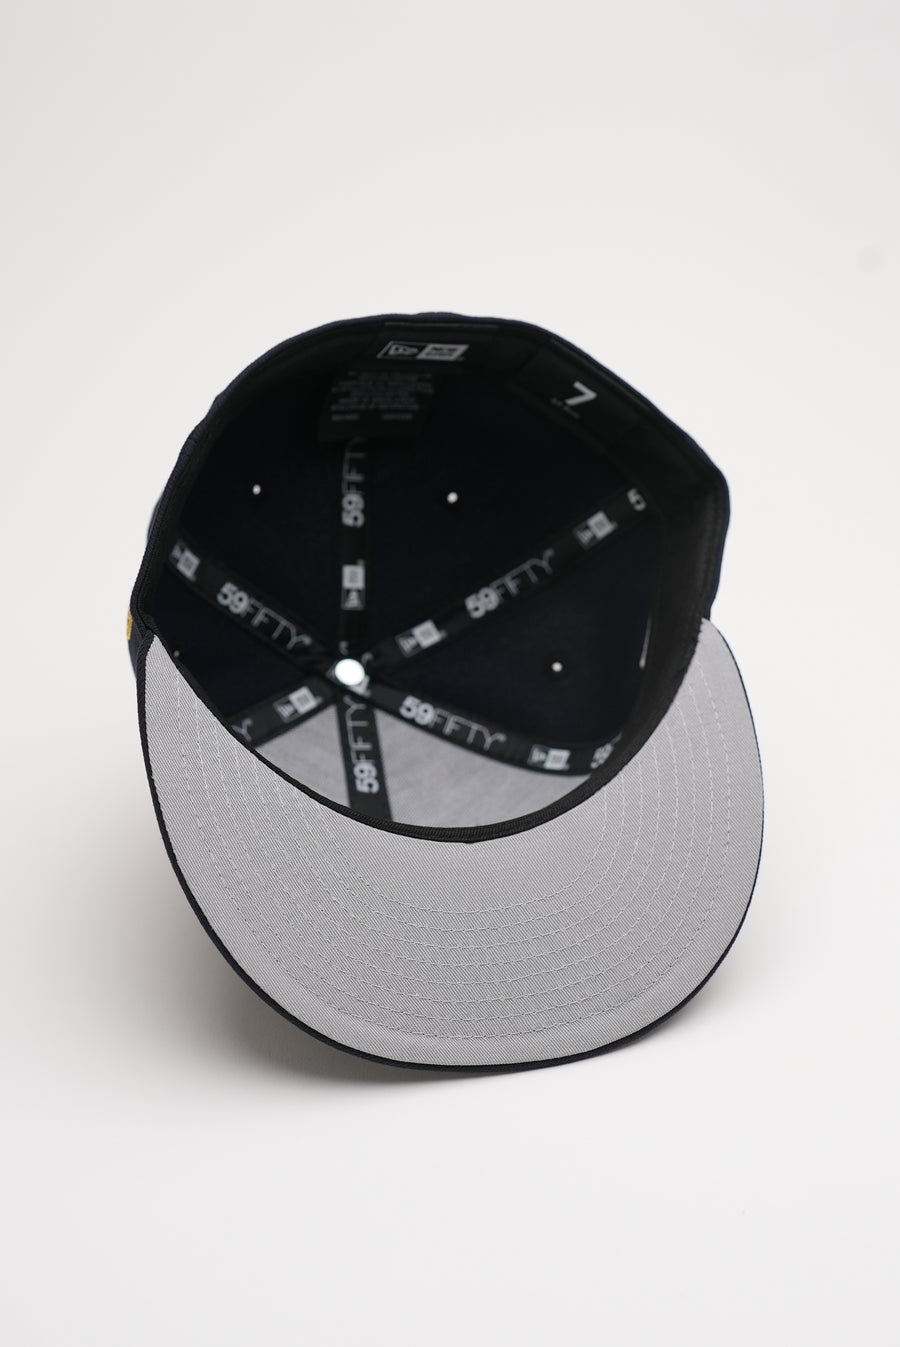 Limited Black / White Gold USA Flag 1LoveIE New Era 59FIFTY Fitted Cap